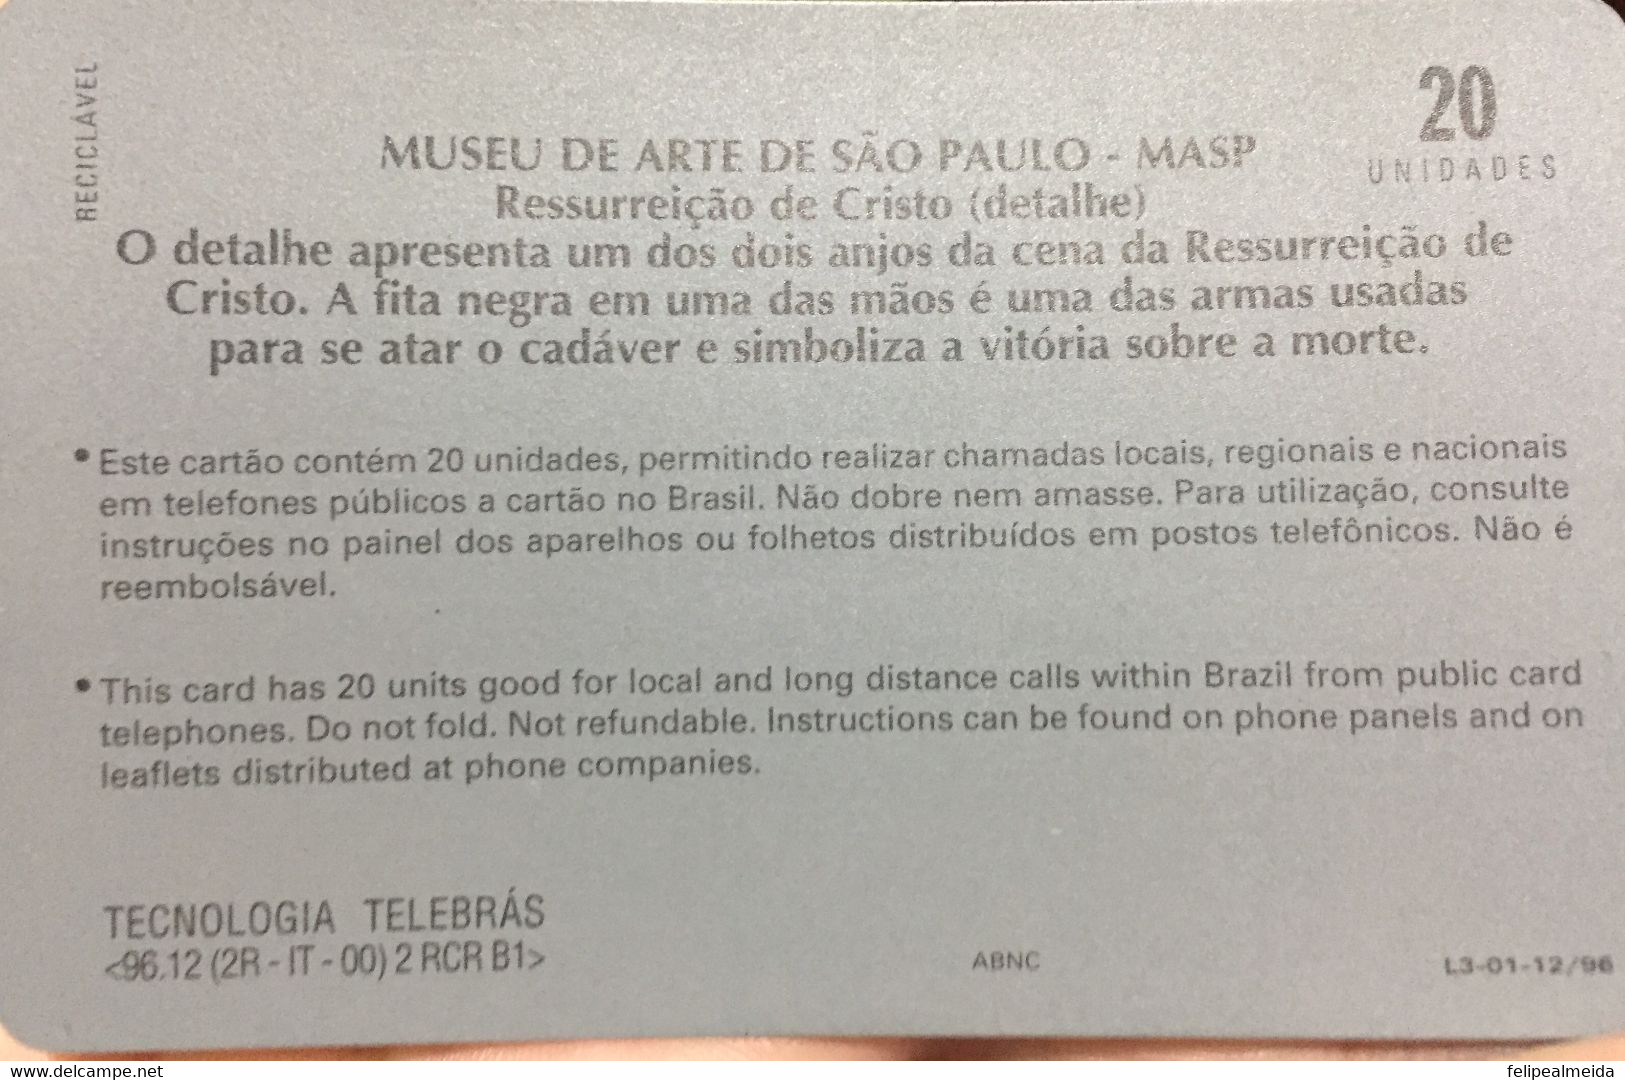 Phone Card Manufactured By Telebras In 1996 - Homage To The São Paulo Museum Of Art - Masb, This Is The Fragment Of - Pintura